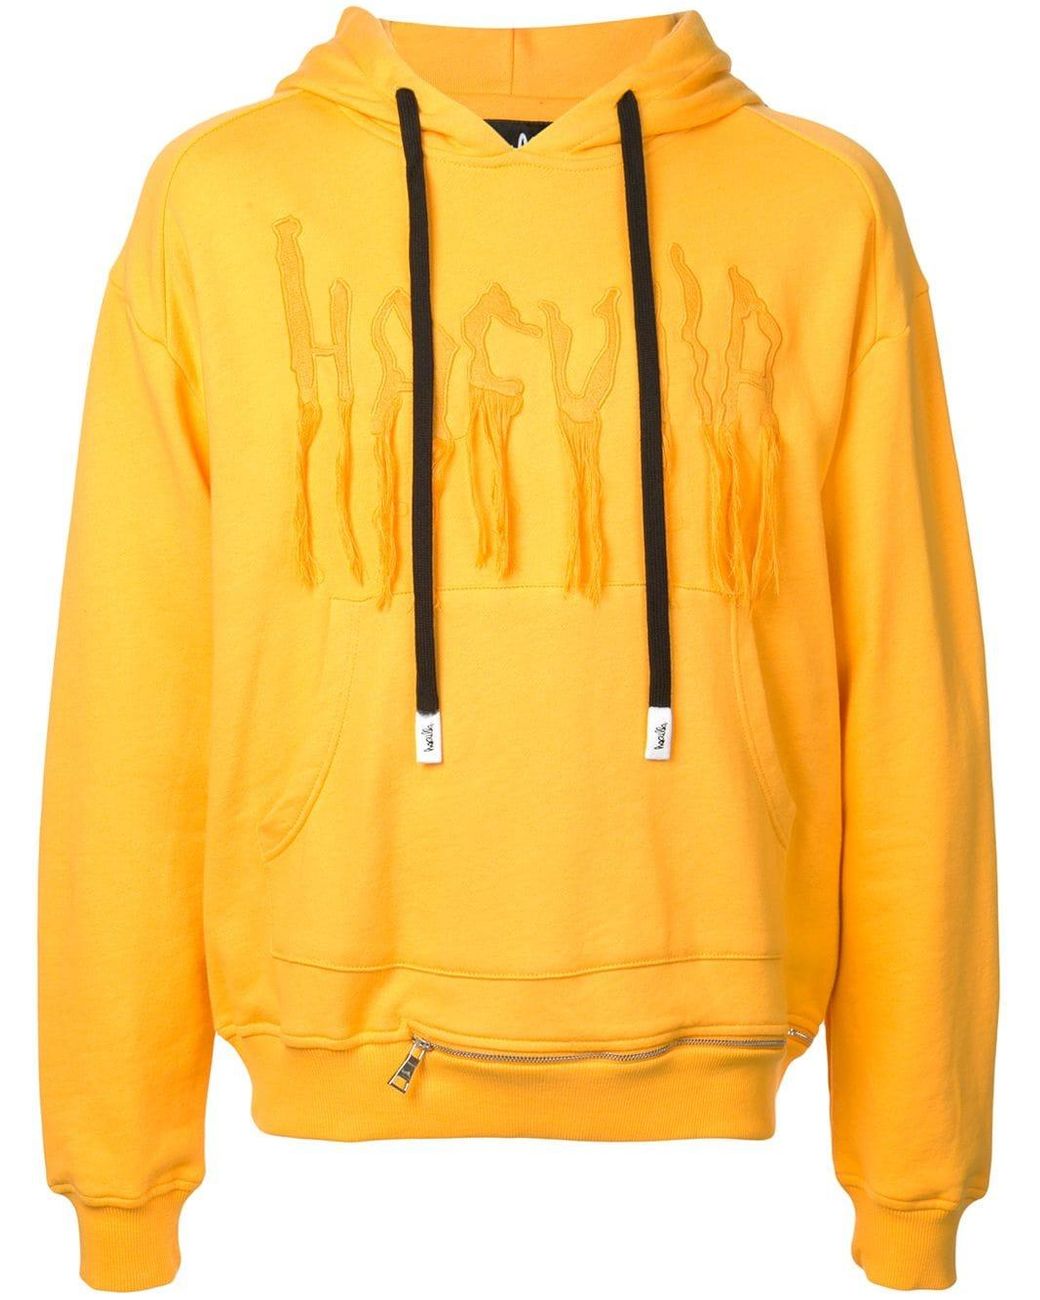 Haculla Cotton Chaos Sweatshirt Hoodie in Yellow for Men - Save 24% - Lyst